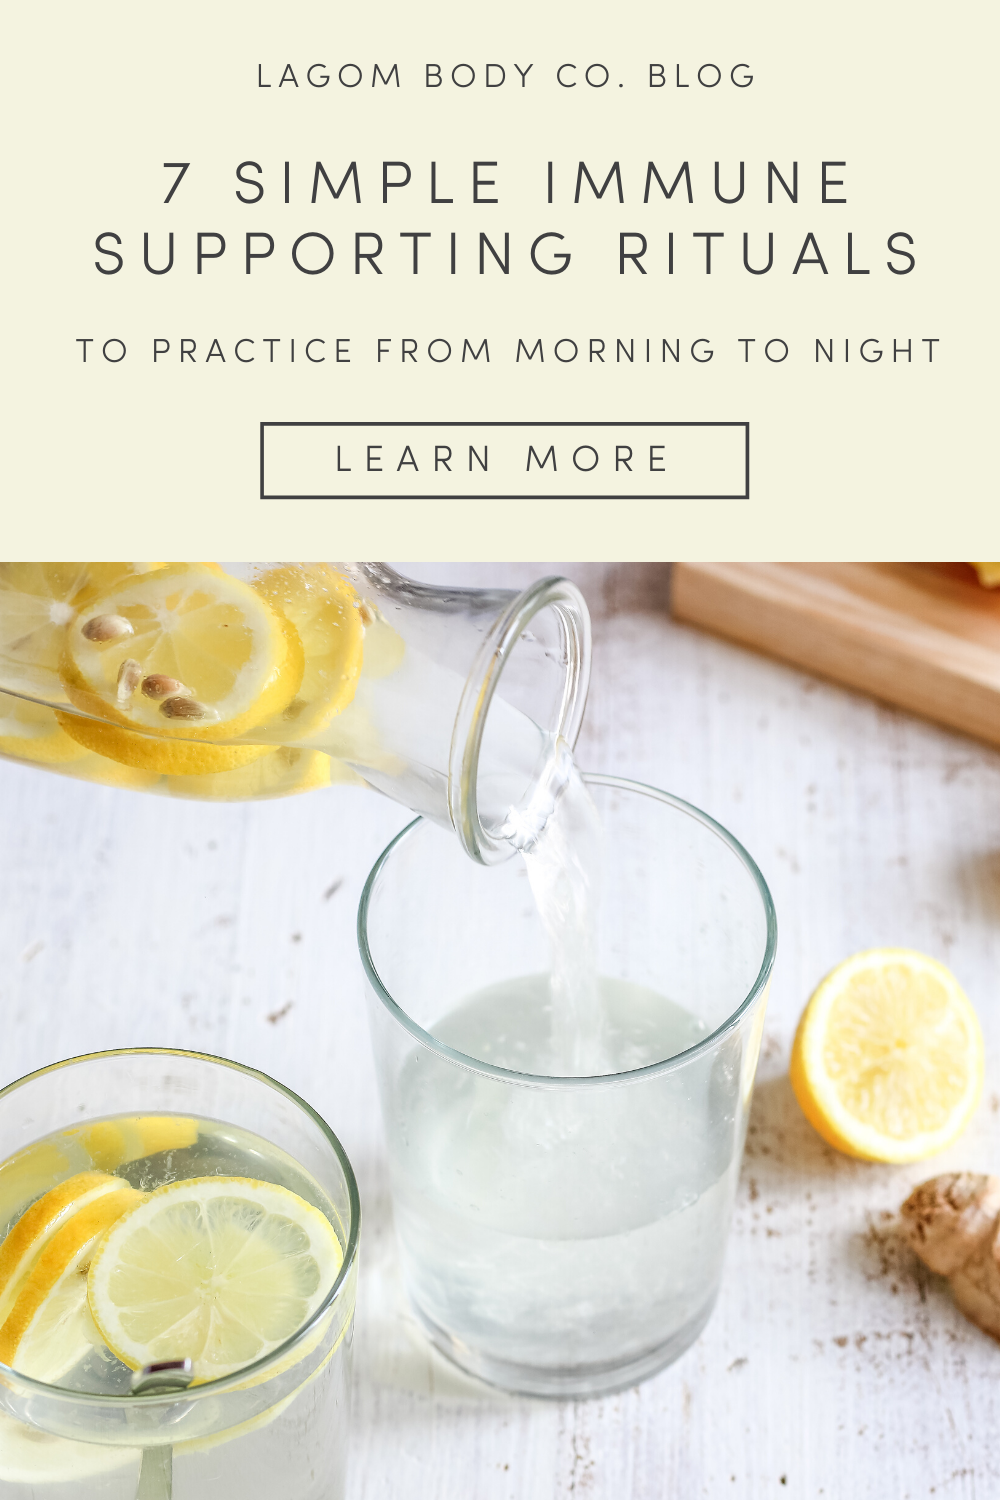 Immune Supporting Rituals to Practice from Morning to Night Pinterest Promo